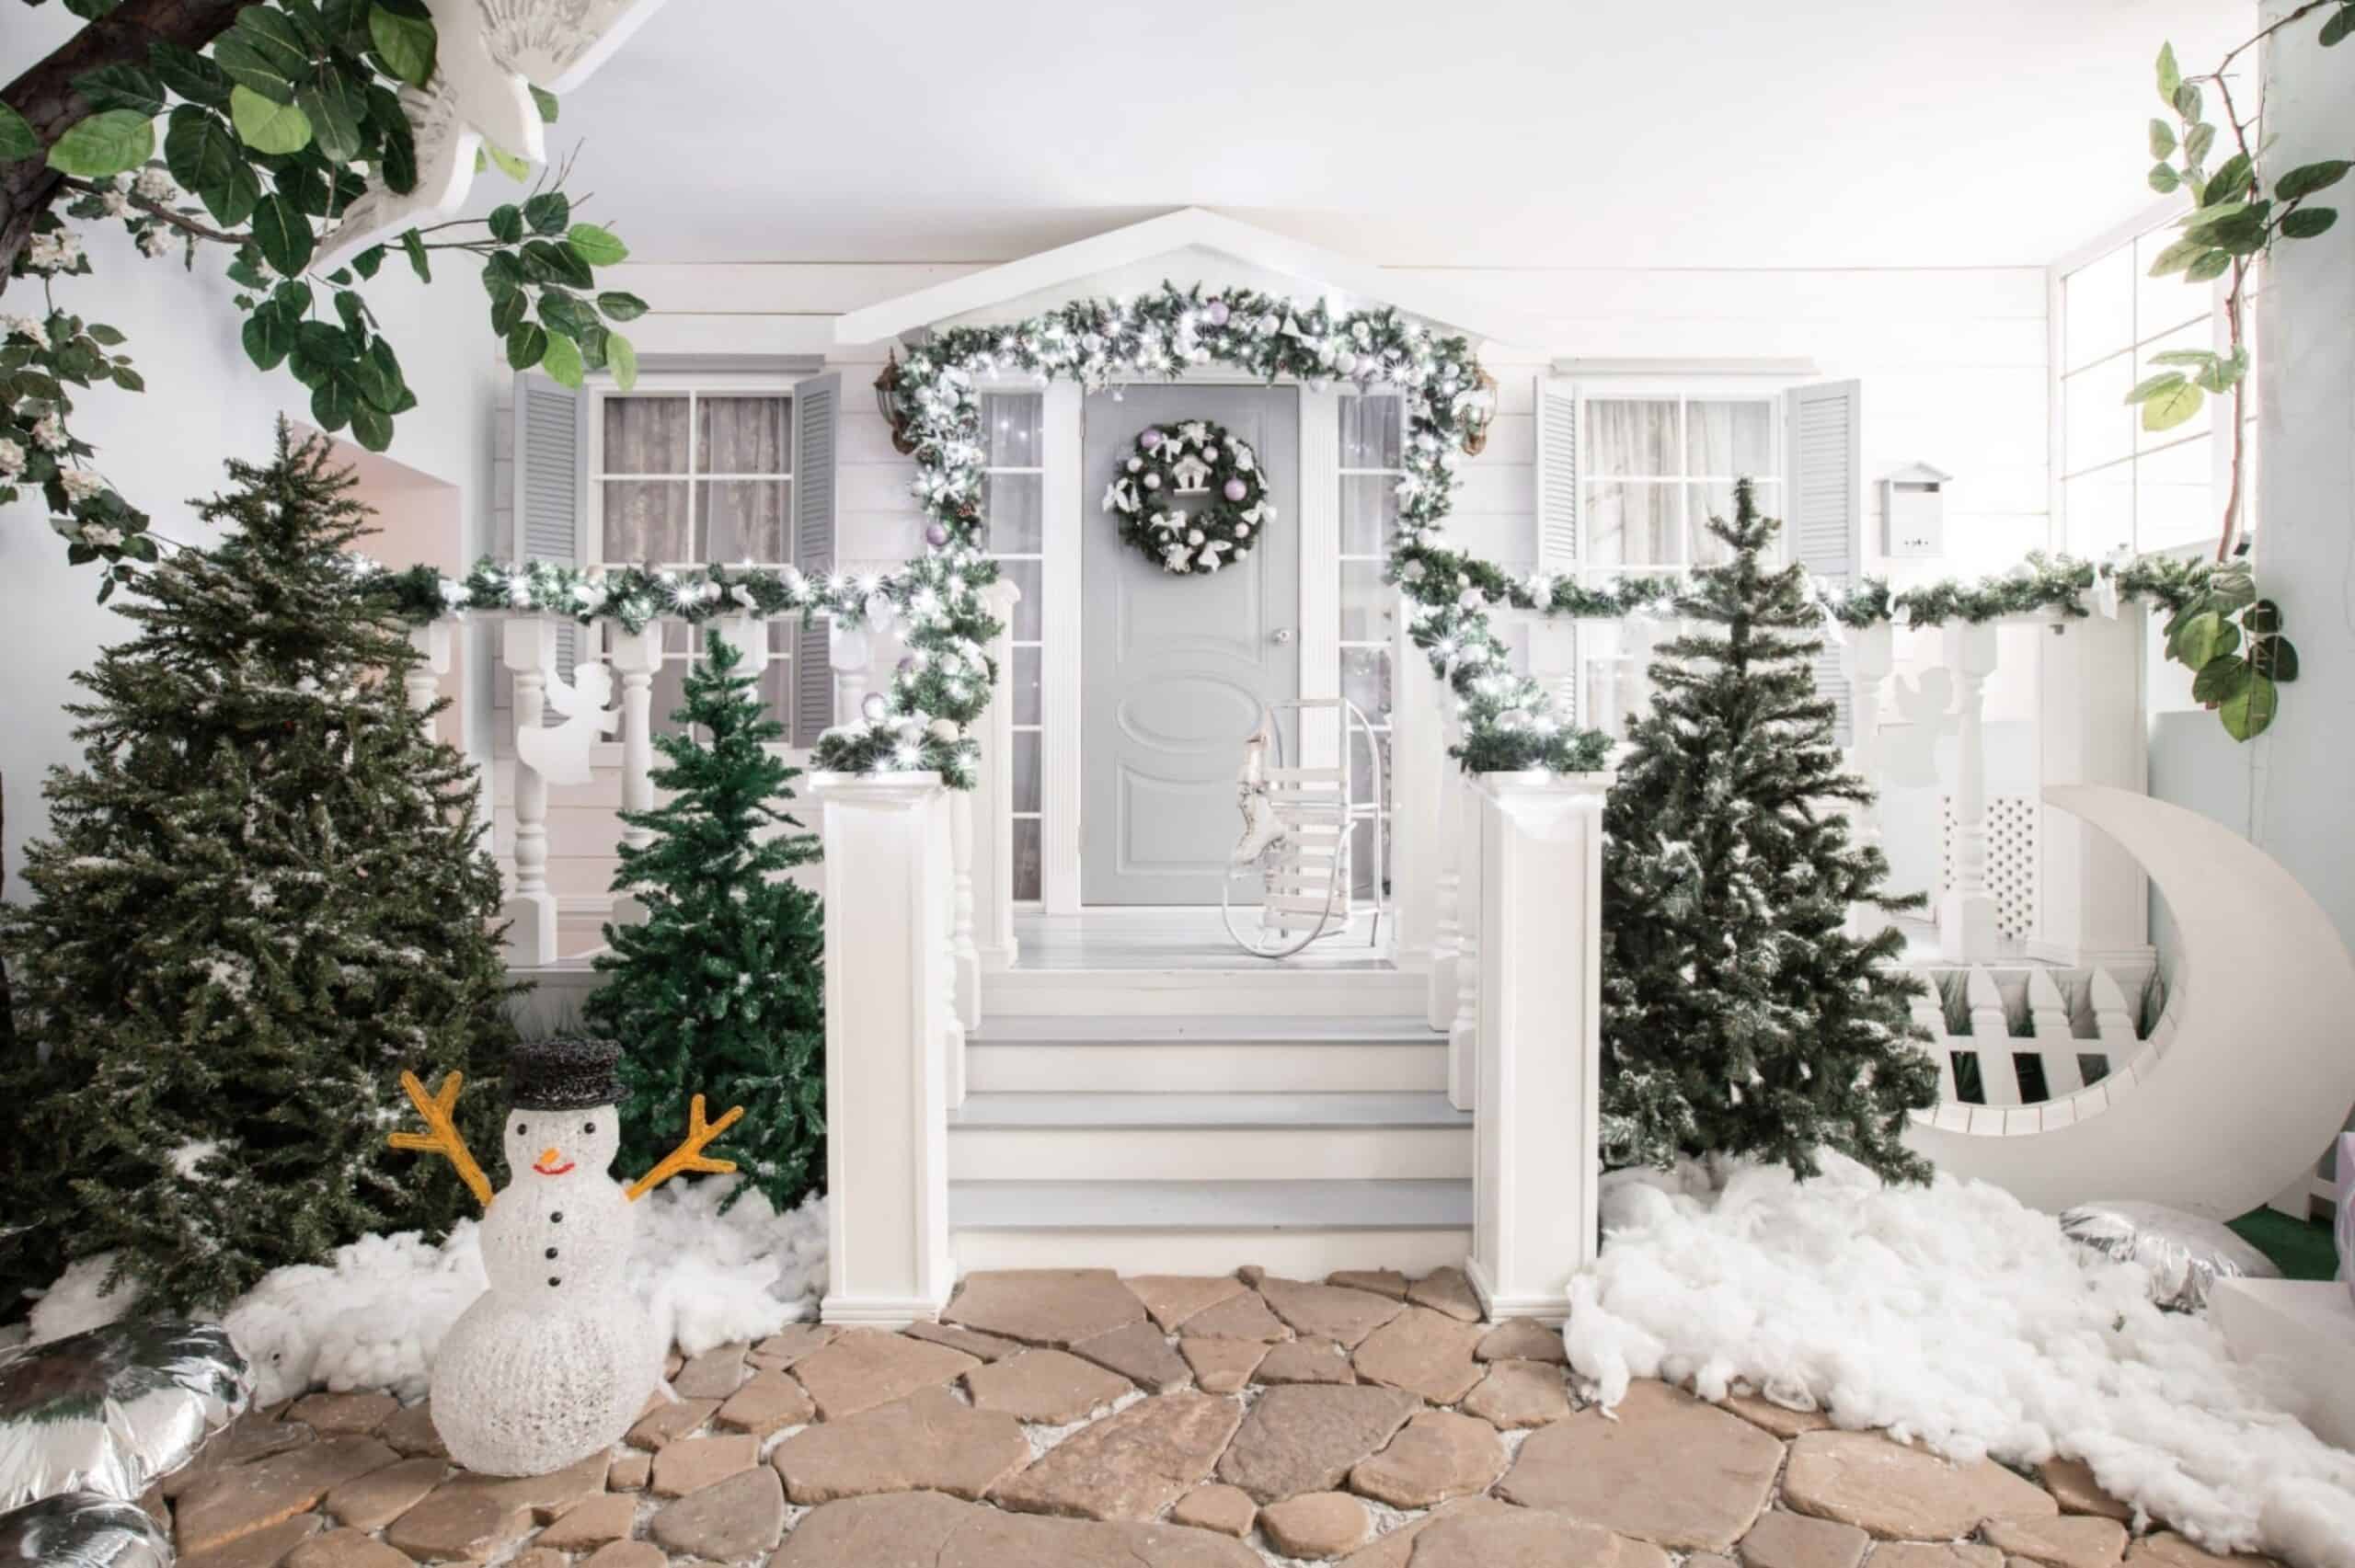 House entrance decorated for holidays